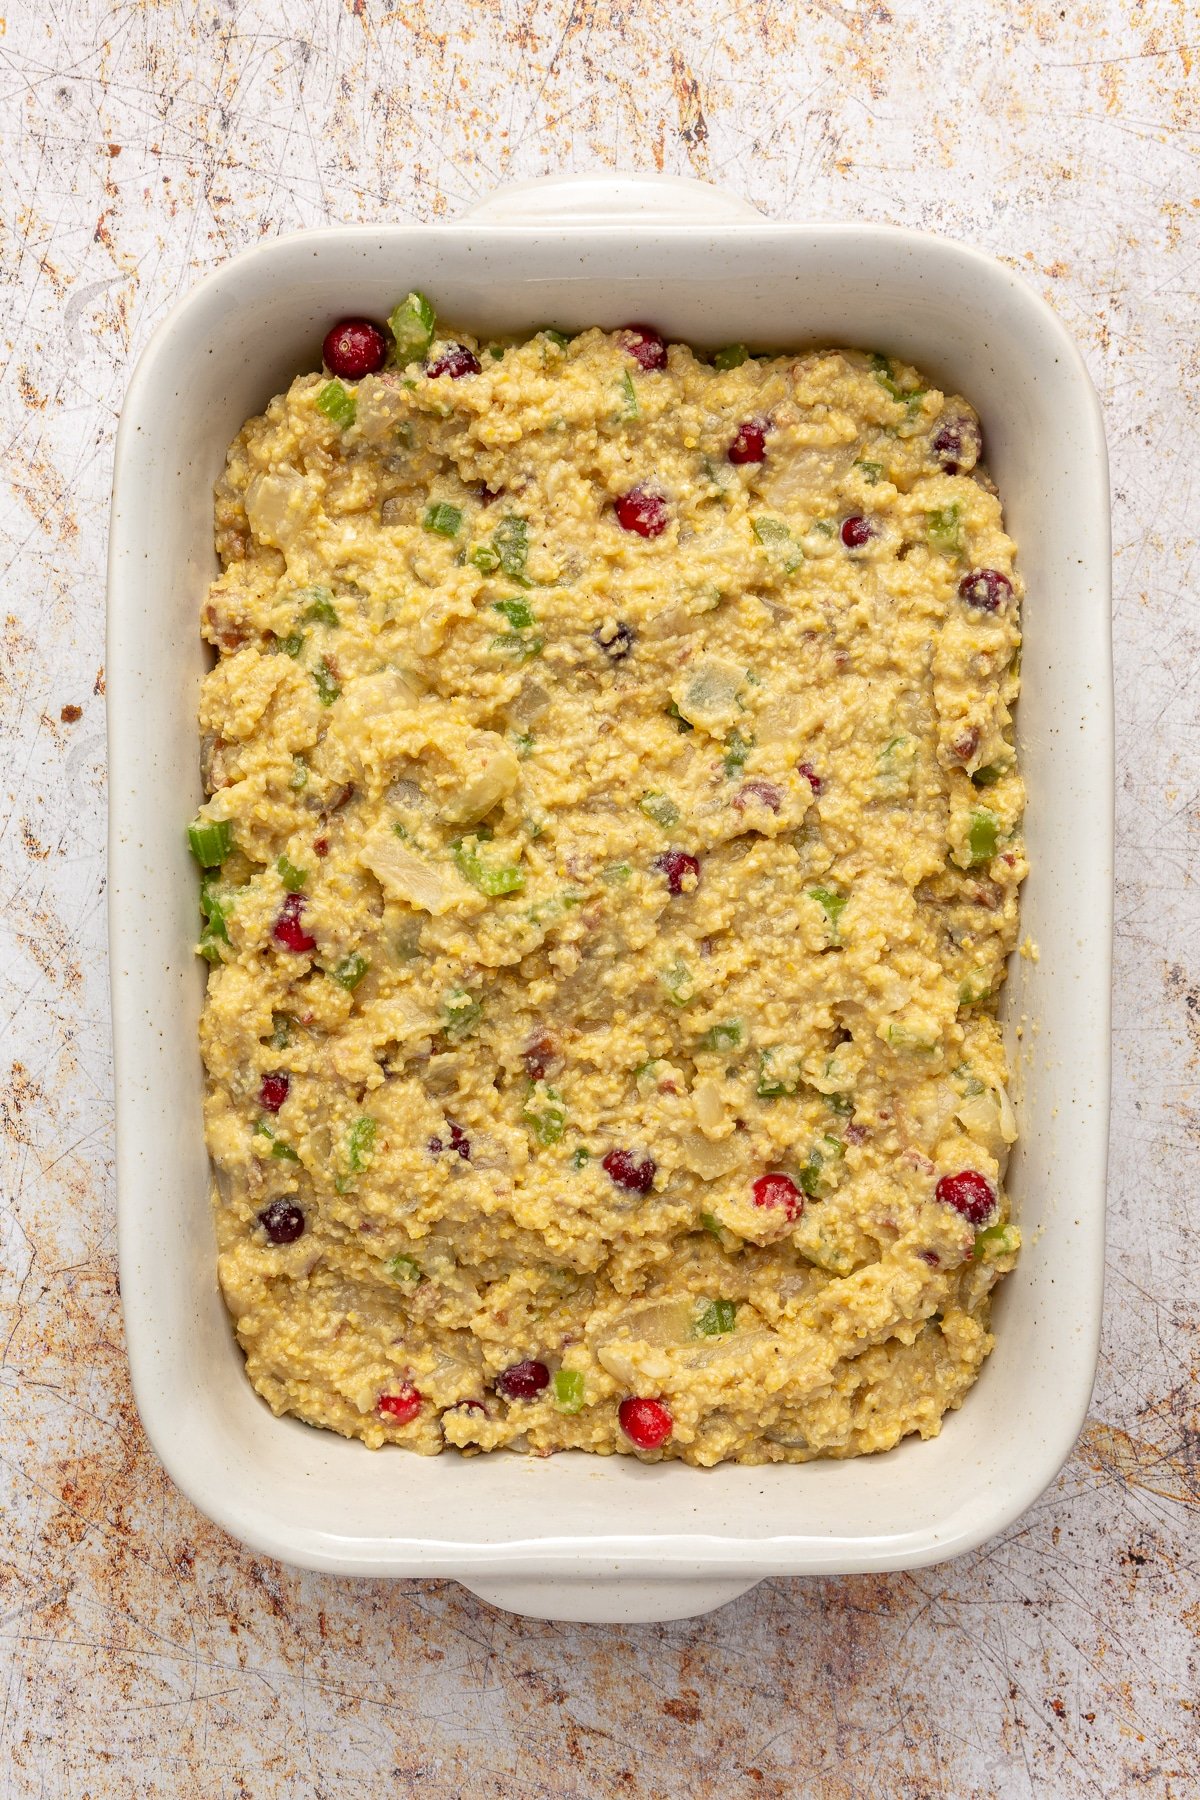 The cornbread, cranberry mixture has been spread evenly in a white, rectangular, baking dish.